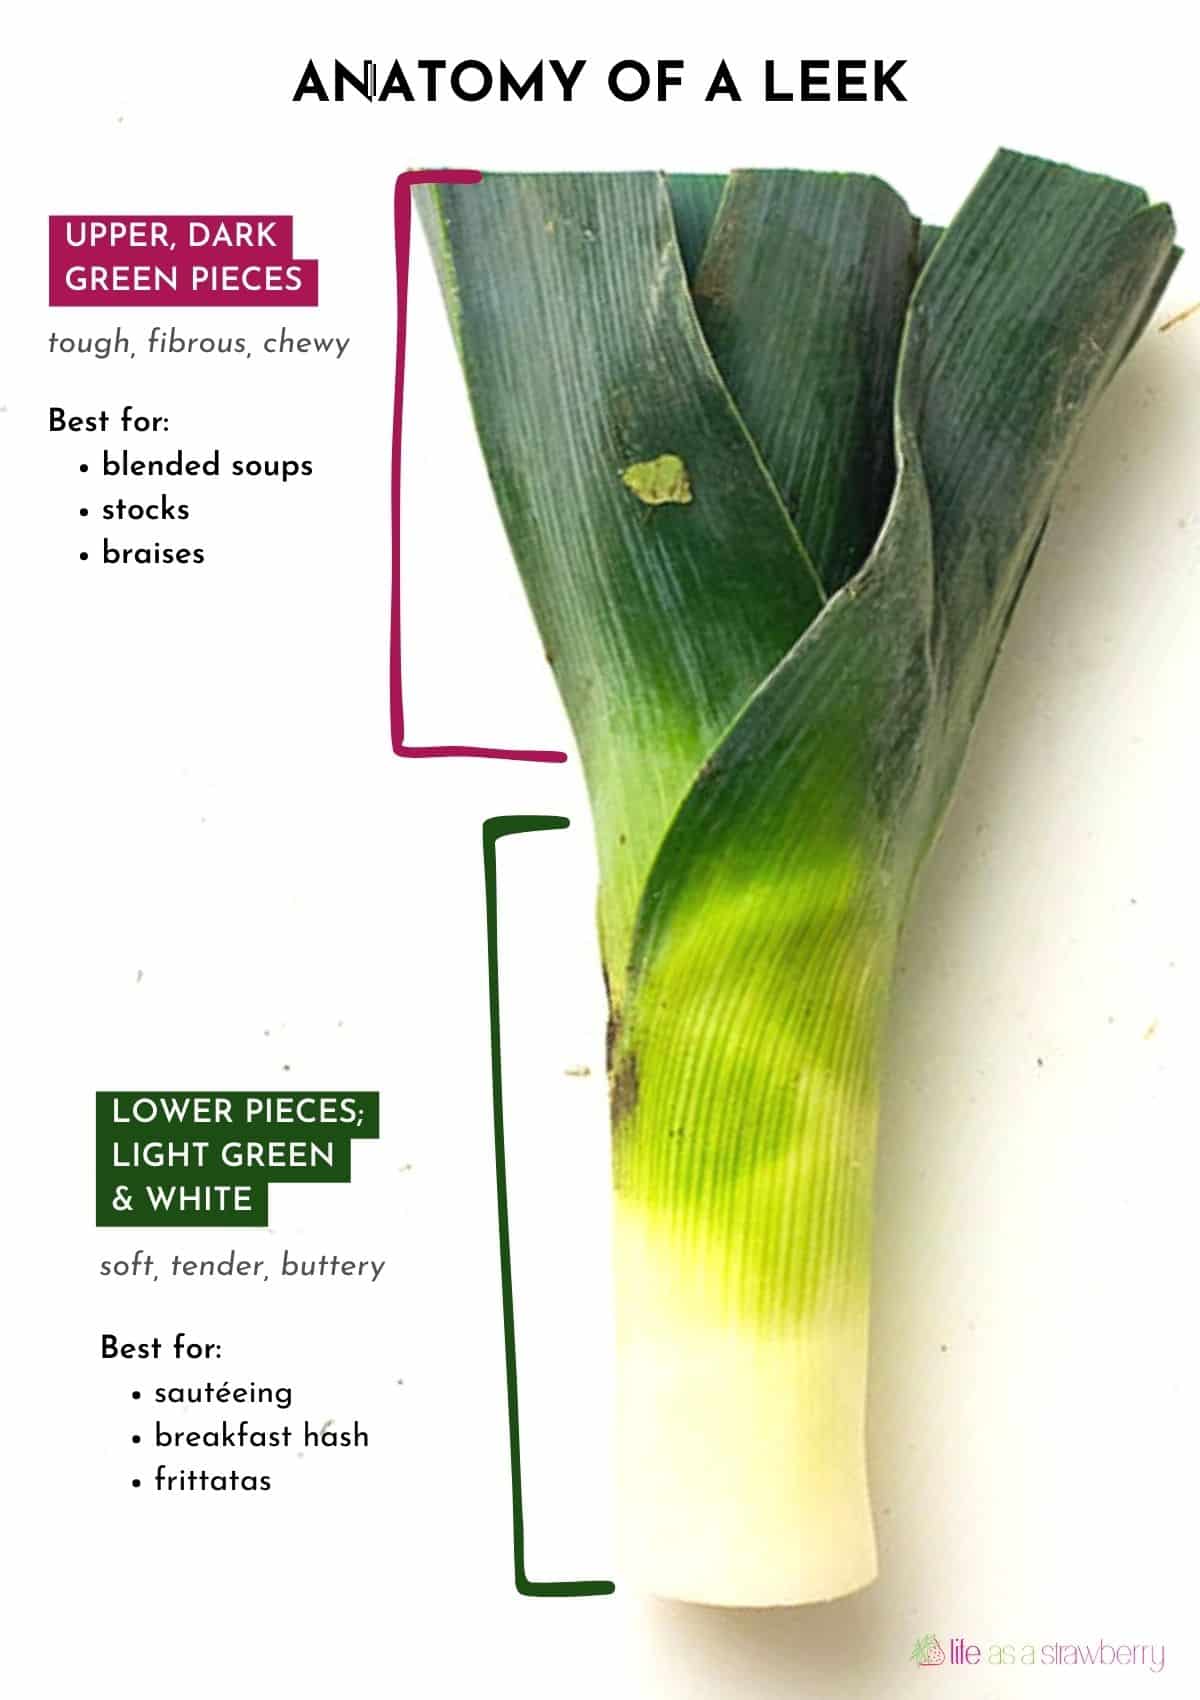 A photo of a leek, with text identifying the various dark green and white pieces.